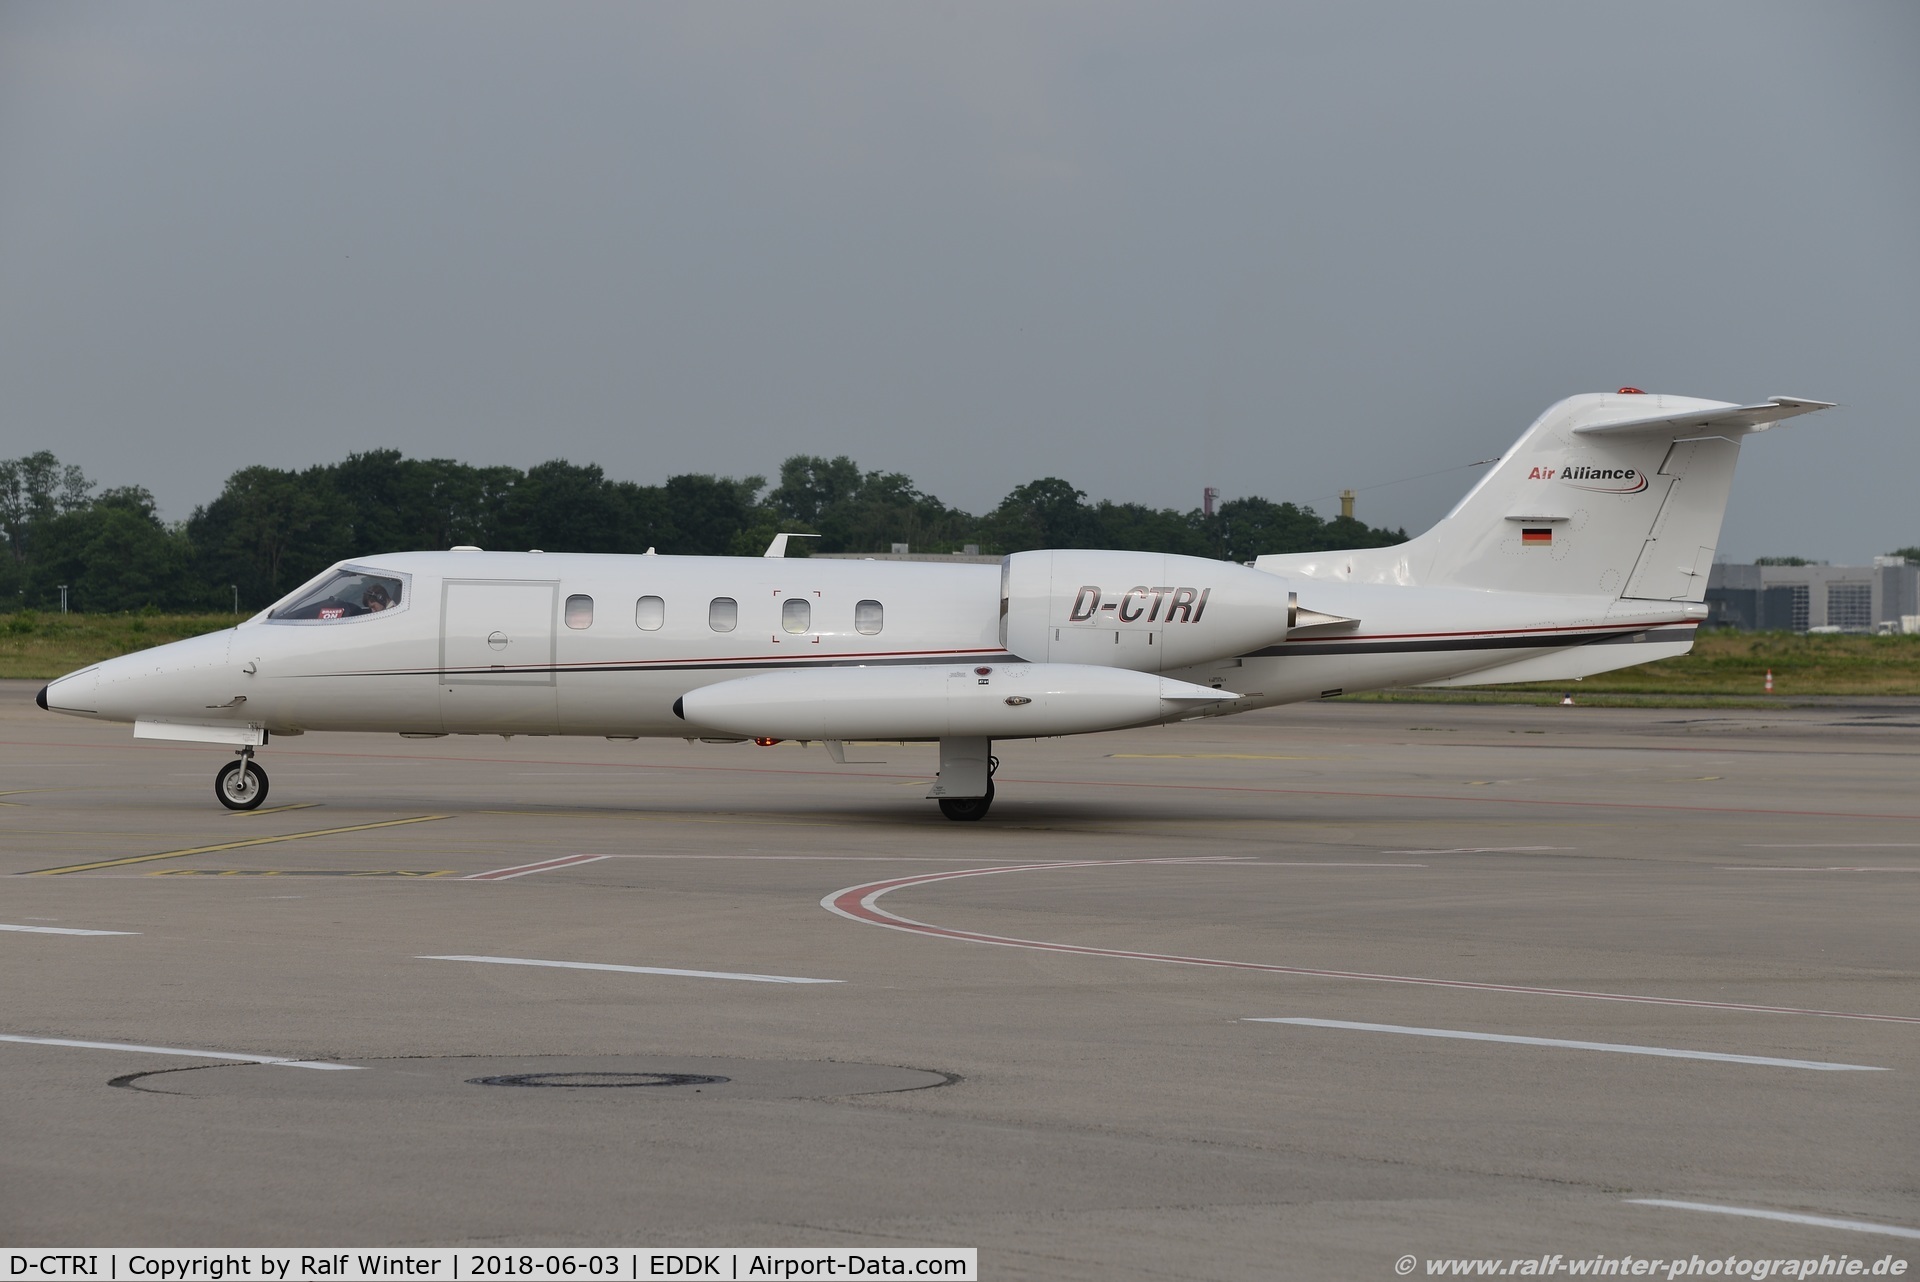 D-CTRI, 1980 Learjet 35A C/N 35A-346, Learjet 35A - AYY Air Alliance - 35346 - D-CTRI - 03.06.2018 - CGN